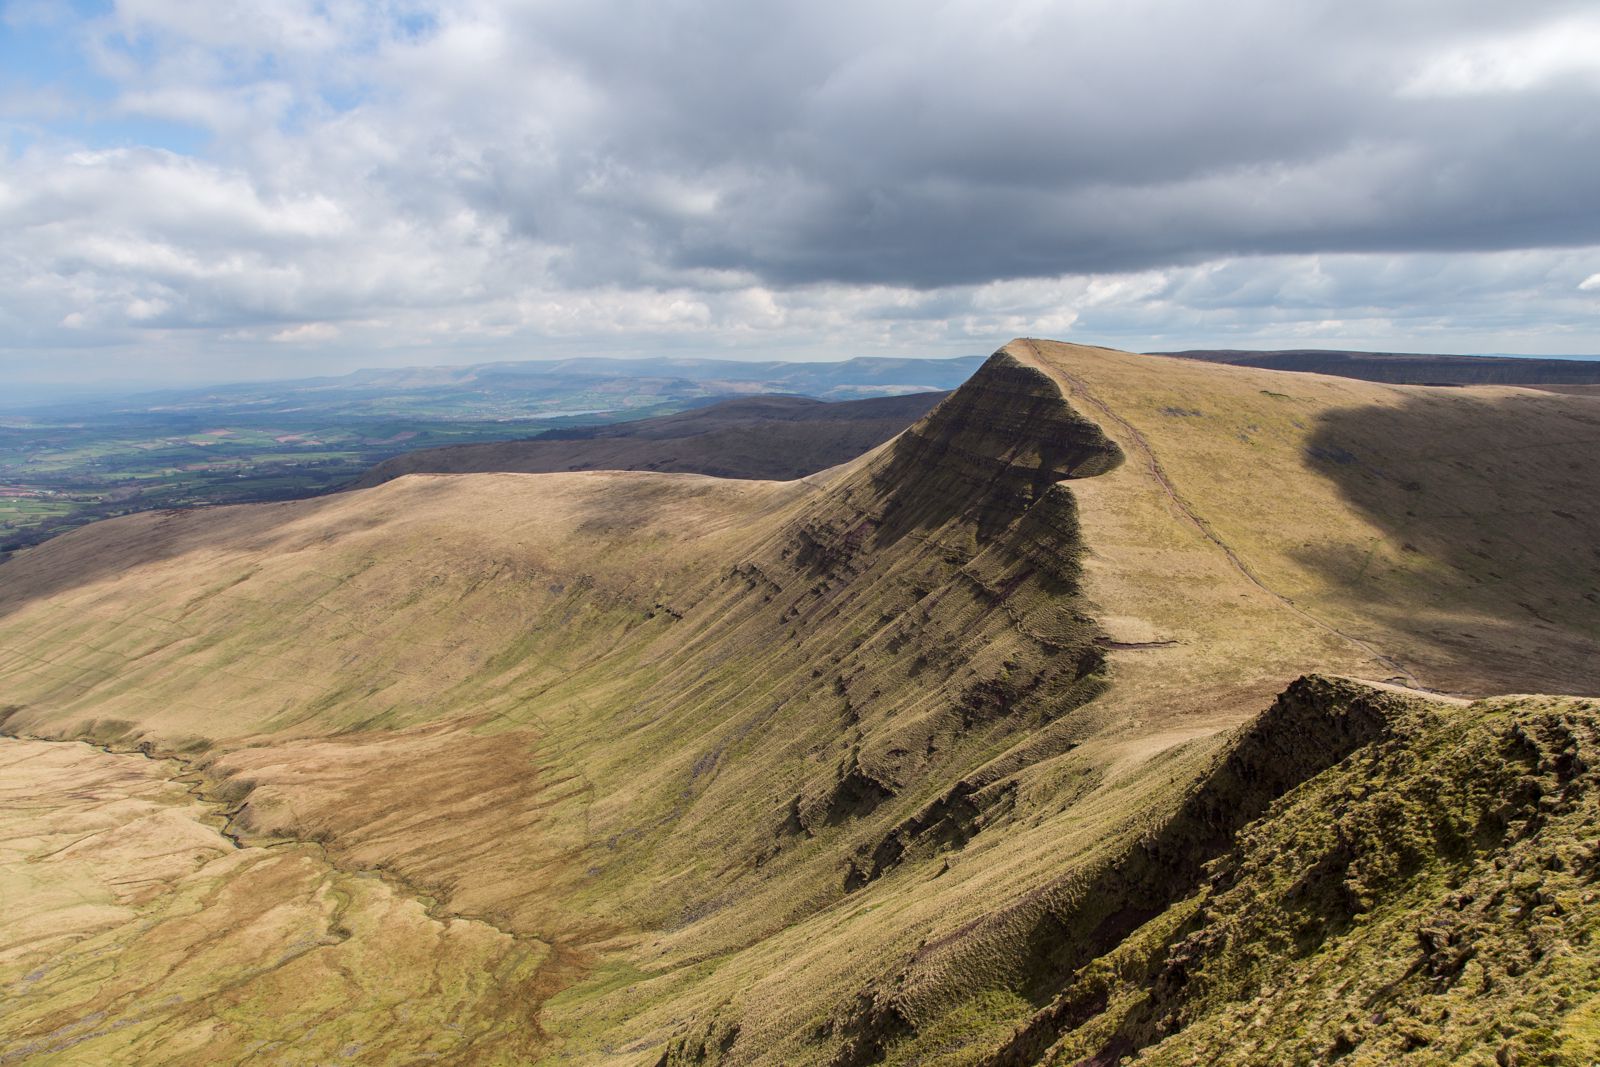 Hotels, Cottages, B&Bs & Glamping in the Brecon Beacons